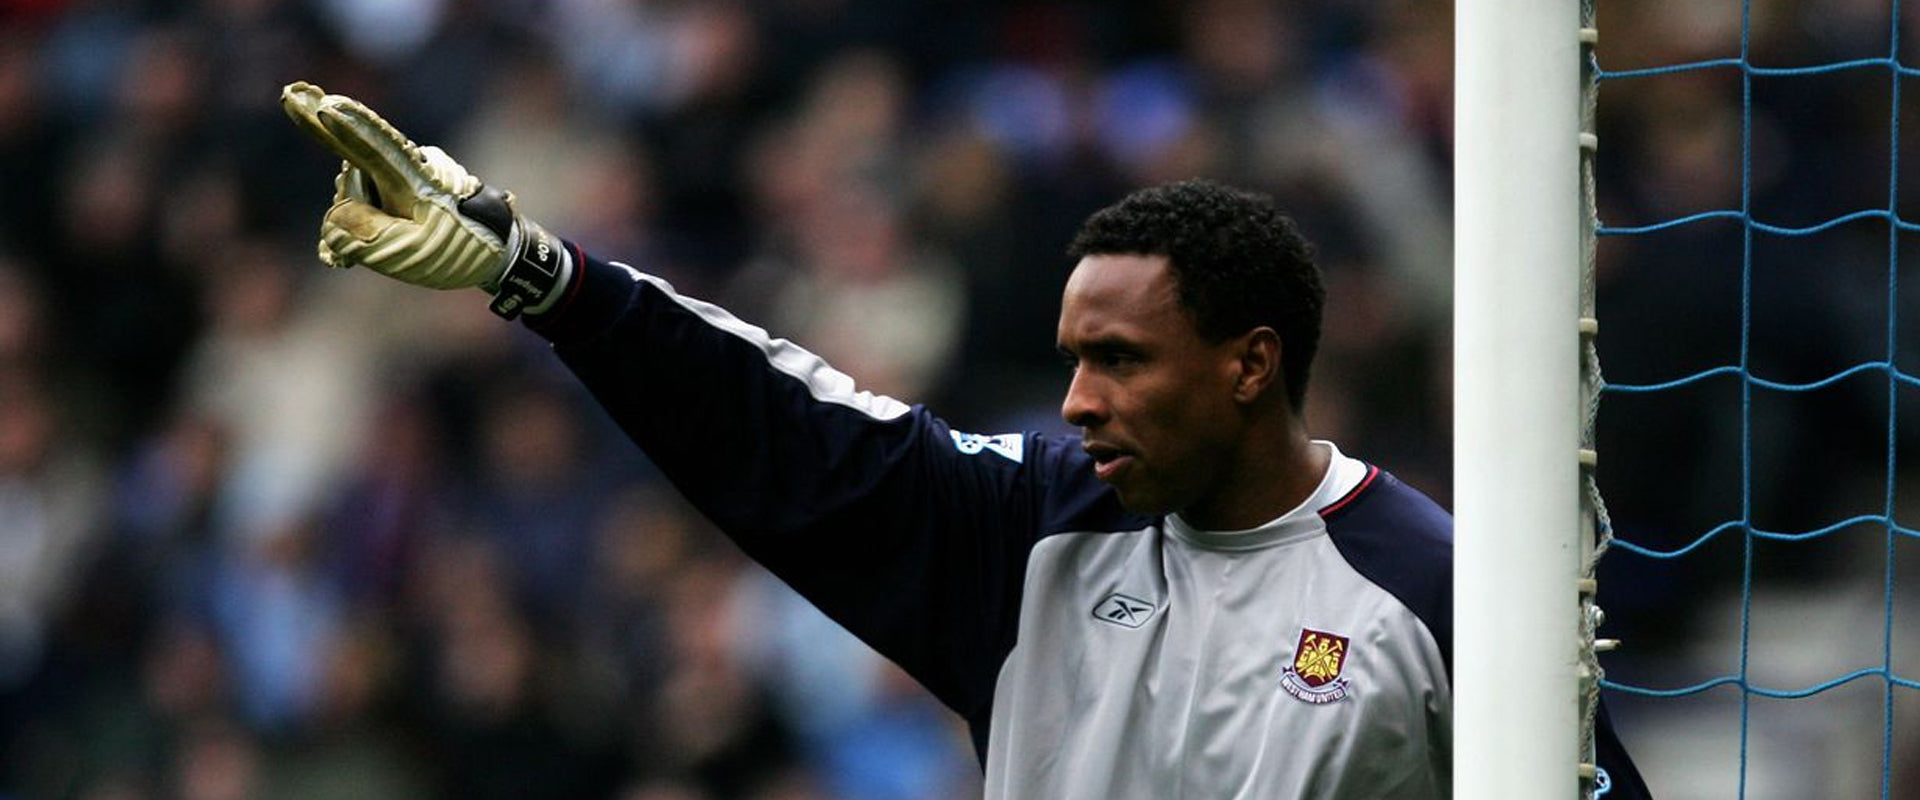 Shaka Hislop in West ham goalkeeper shirt standing in goal pointing his right arm in front of him wearing Selsport goalkeeper gloves